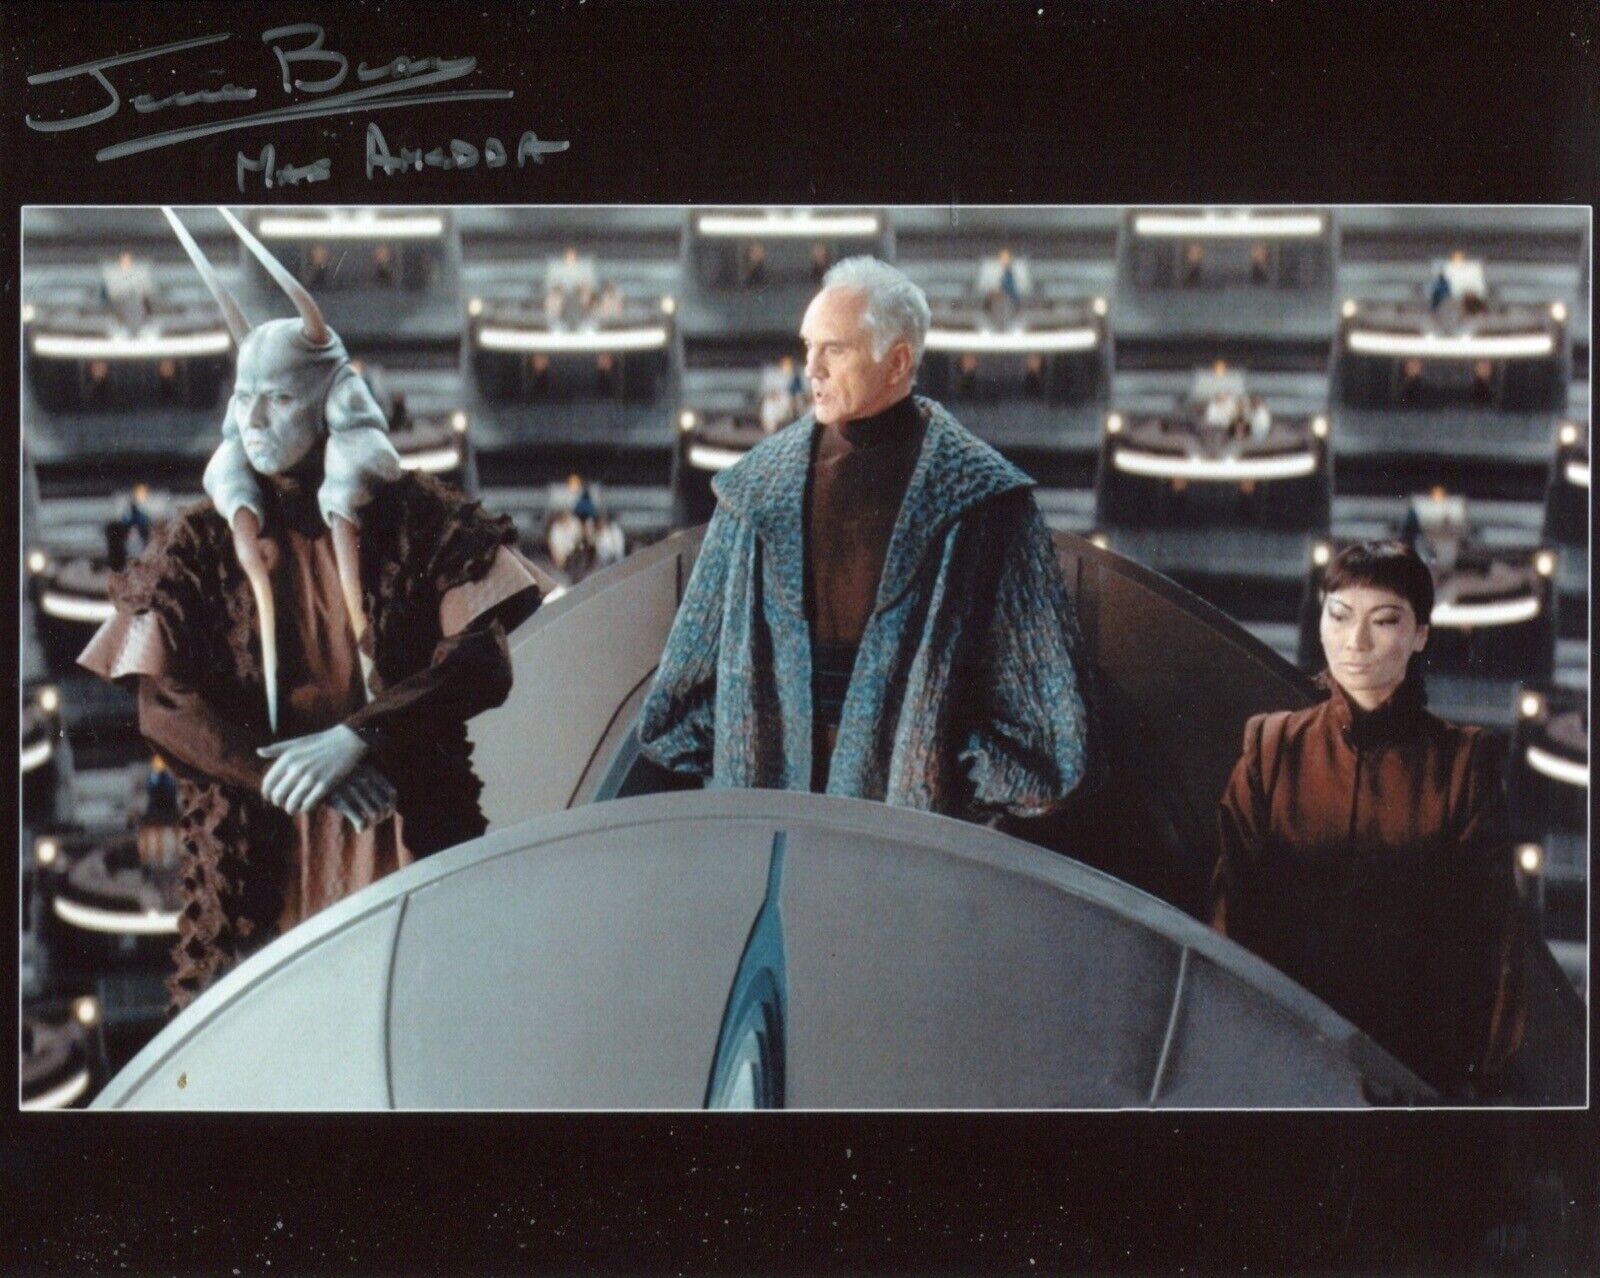 Star Wars Phantom Menace 8x10 scene photo signed by Jerome Blake. All autographs come with a